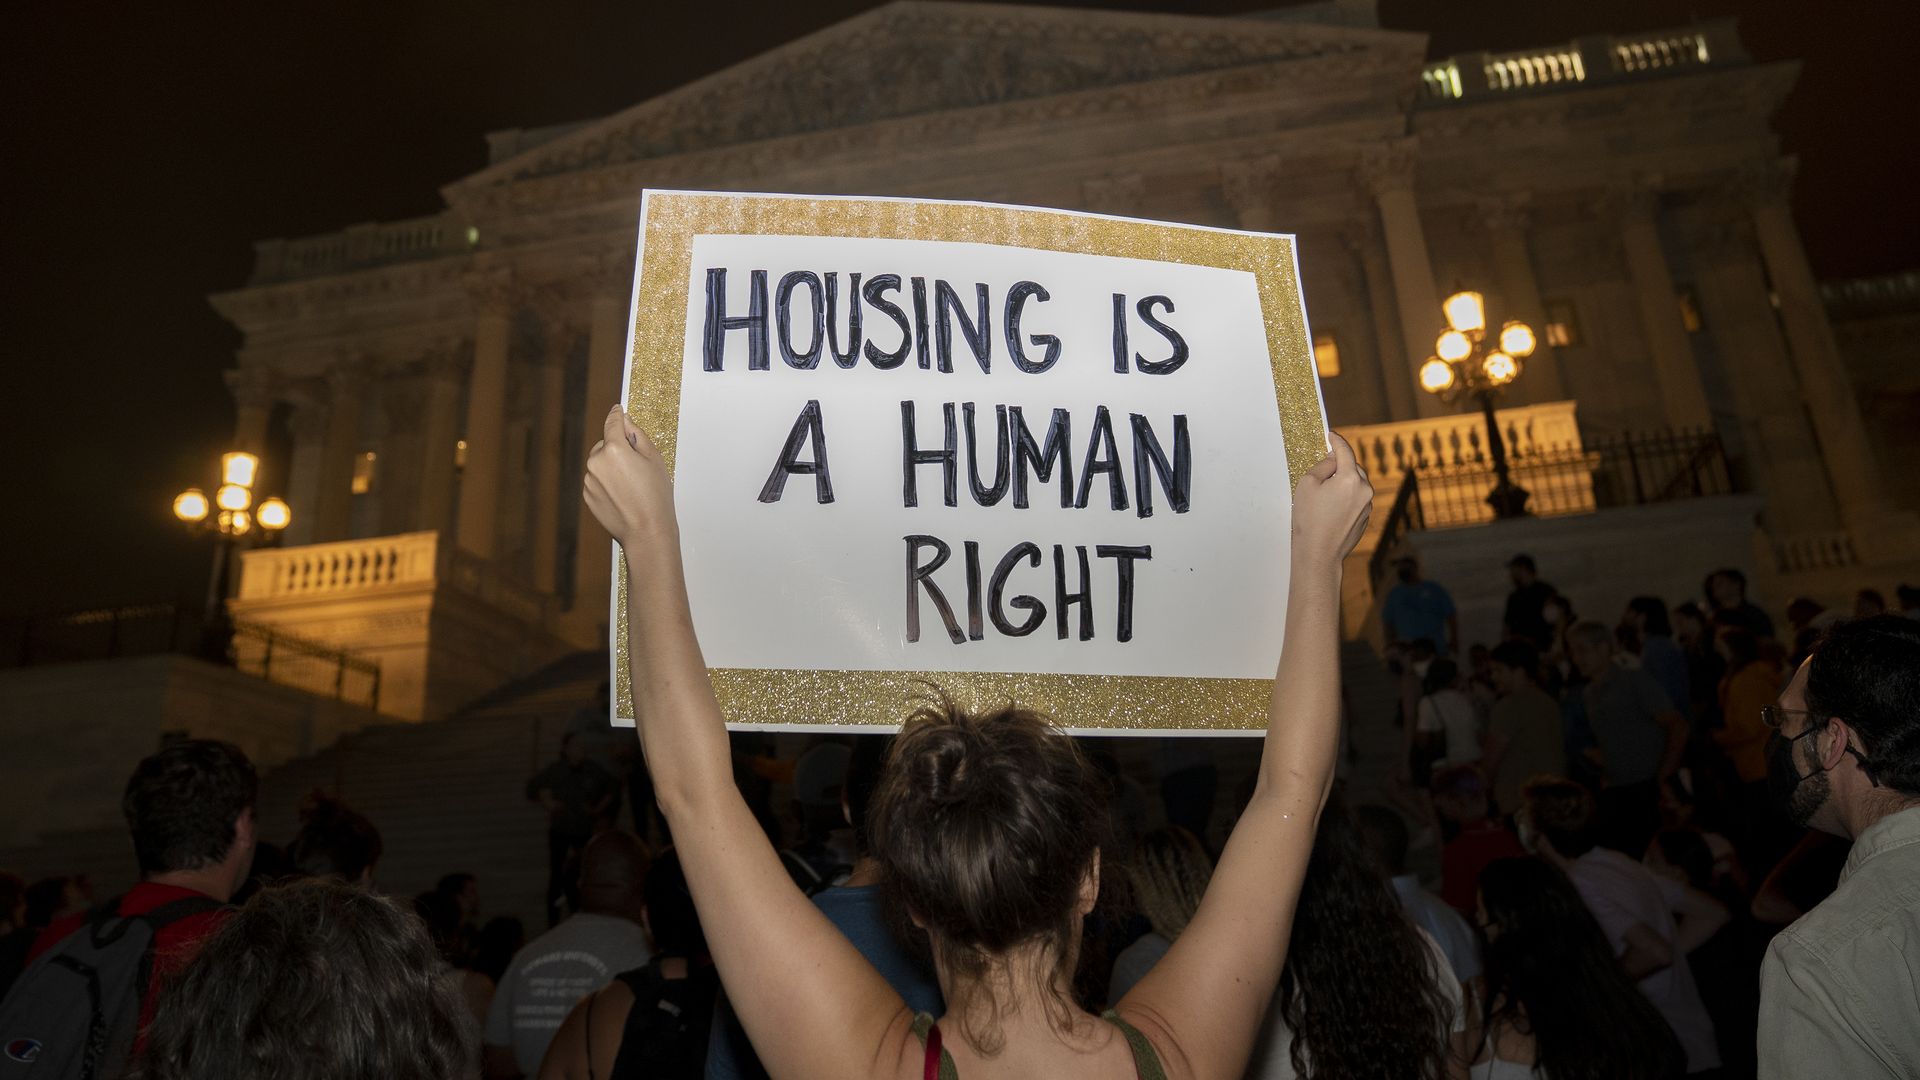 Photo of a person holding up a sign that says "Housing is a human right" in front of a building int he nighttime